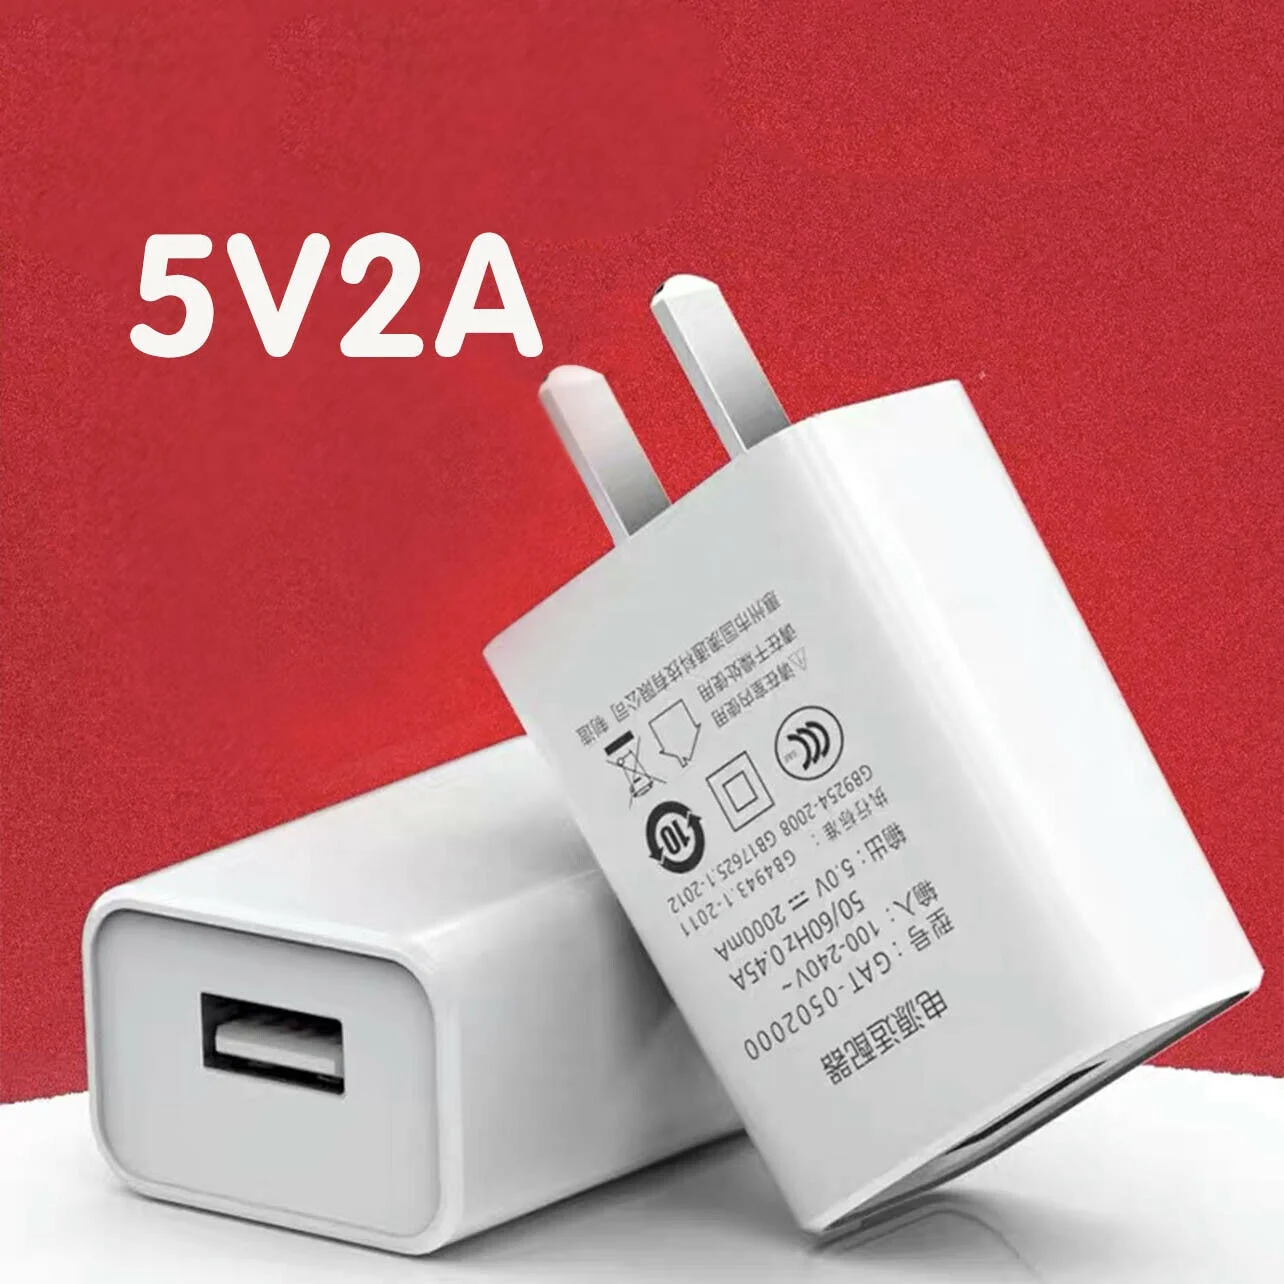 

5V 2A USB Port Jack Wall Charger 5 Volt v 2 Amp AC to DC Power Adapter White